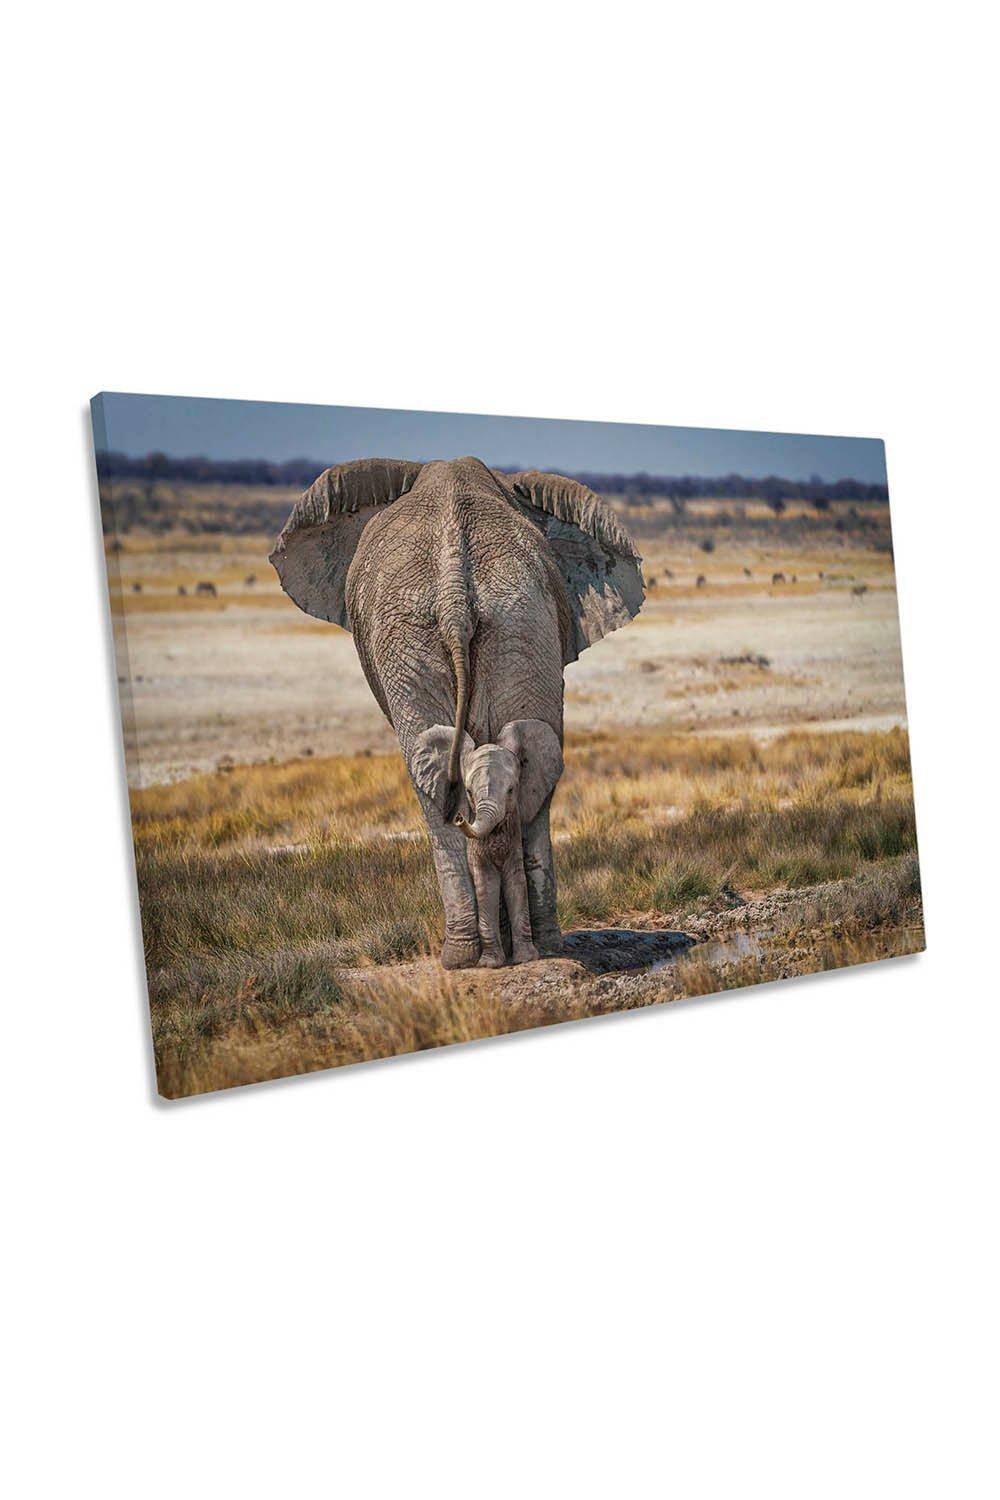 Baby Elephant with Mum Wildlife Canvas Wall Art Picture Print